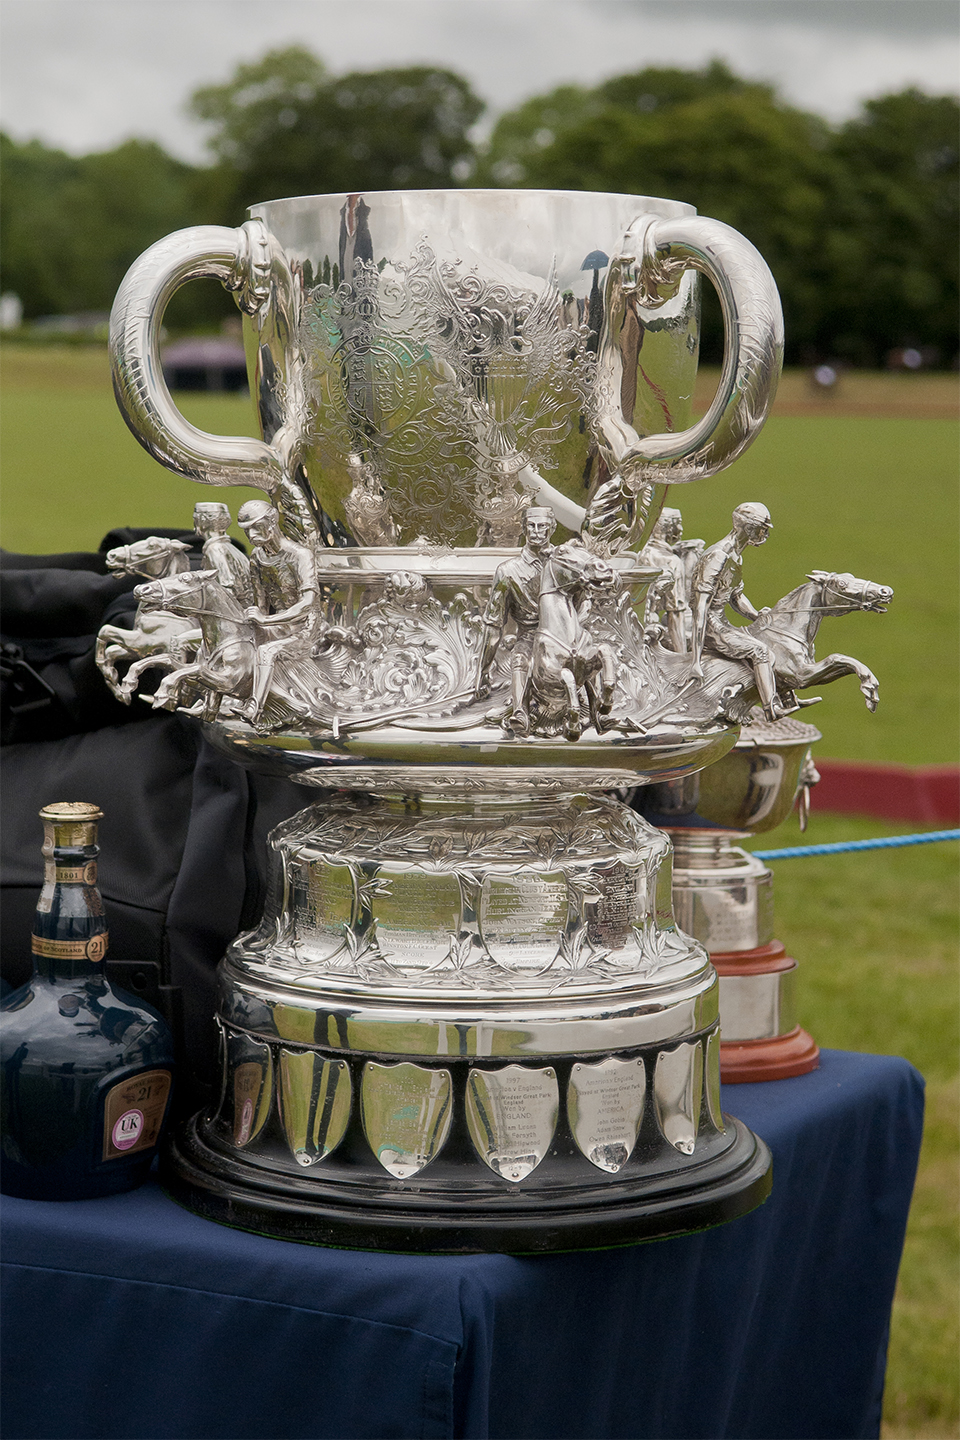 U.S. Polo Assn. Outfits USA Team in Prestigious Westchester Cup, Airing